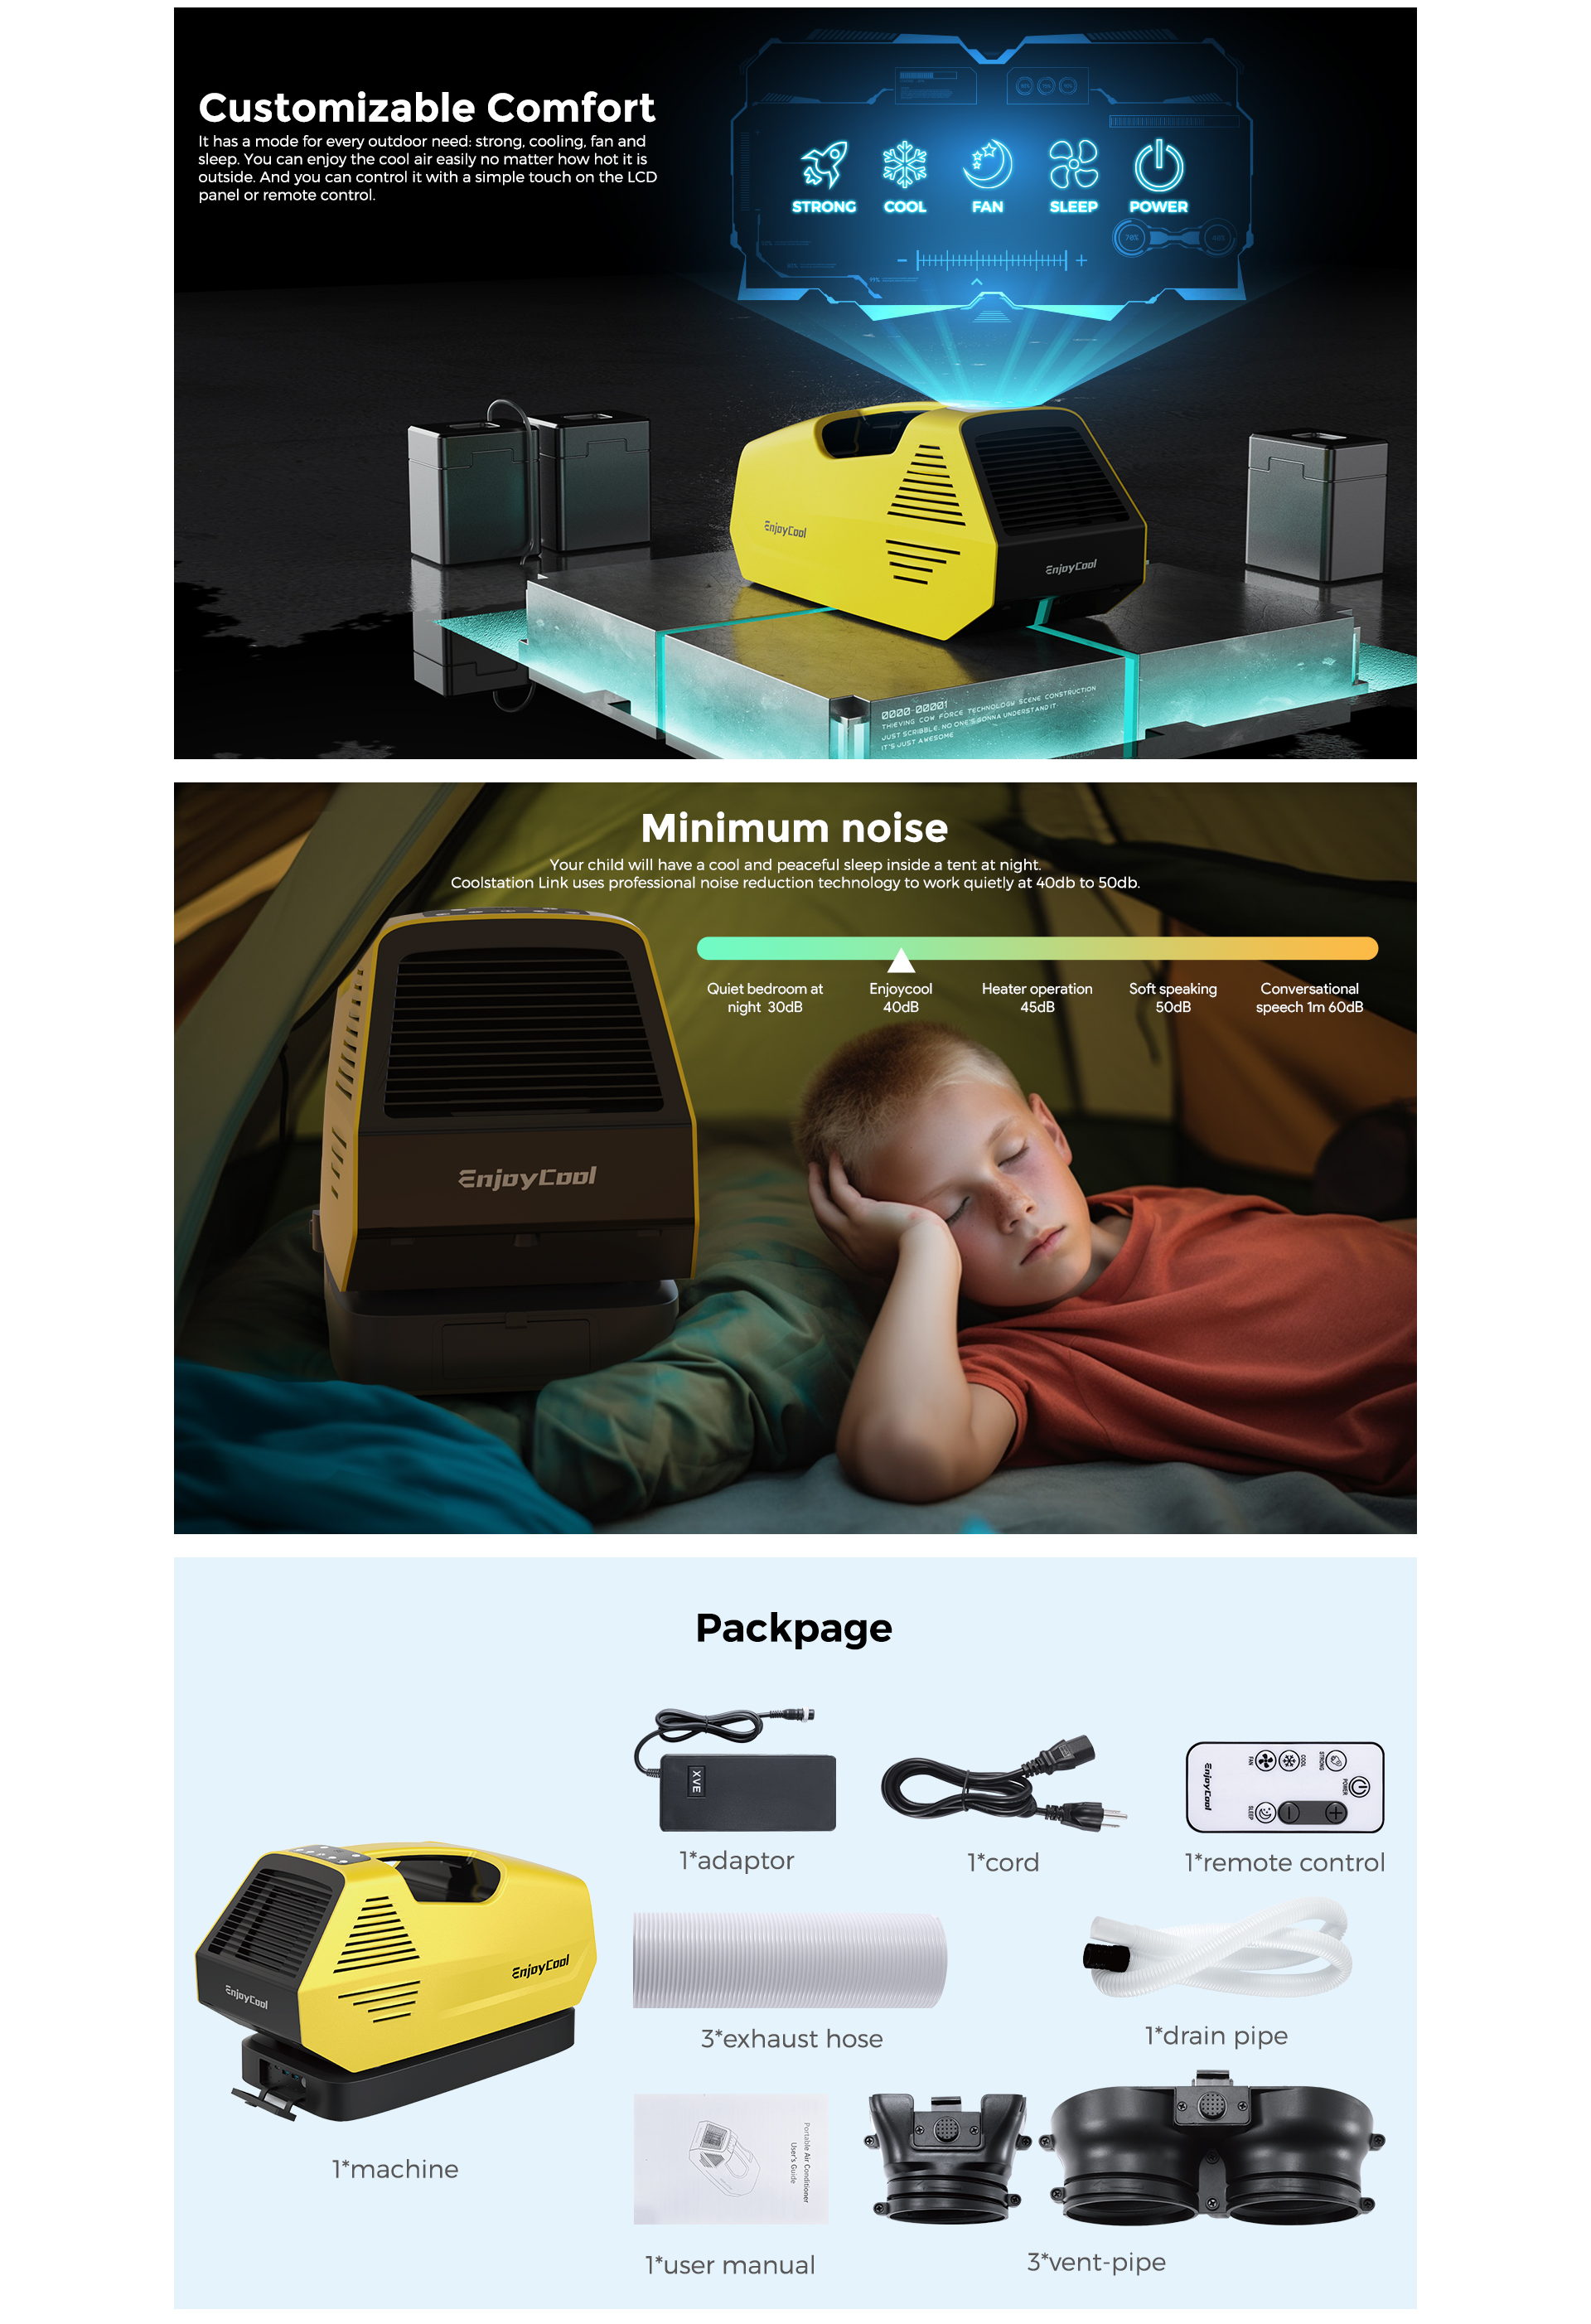 The link air coinditioner,portable ac for home,rolling ac unit, has a low noise level of 43 decibels, giving you a comfortable and cool night's sleep.